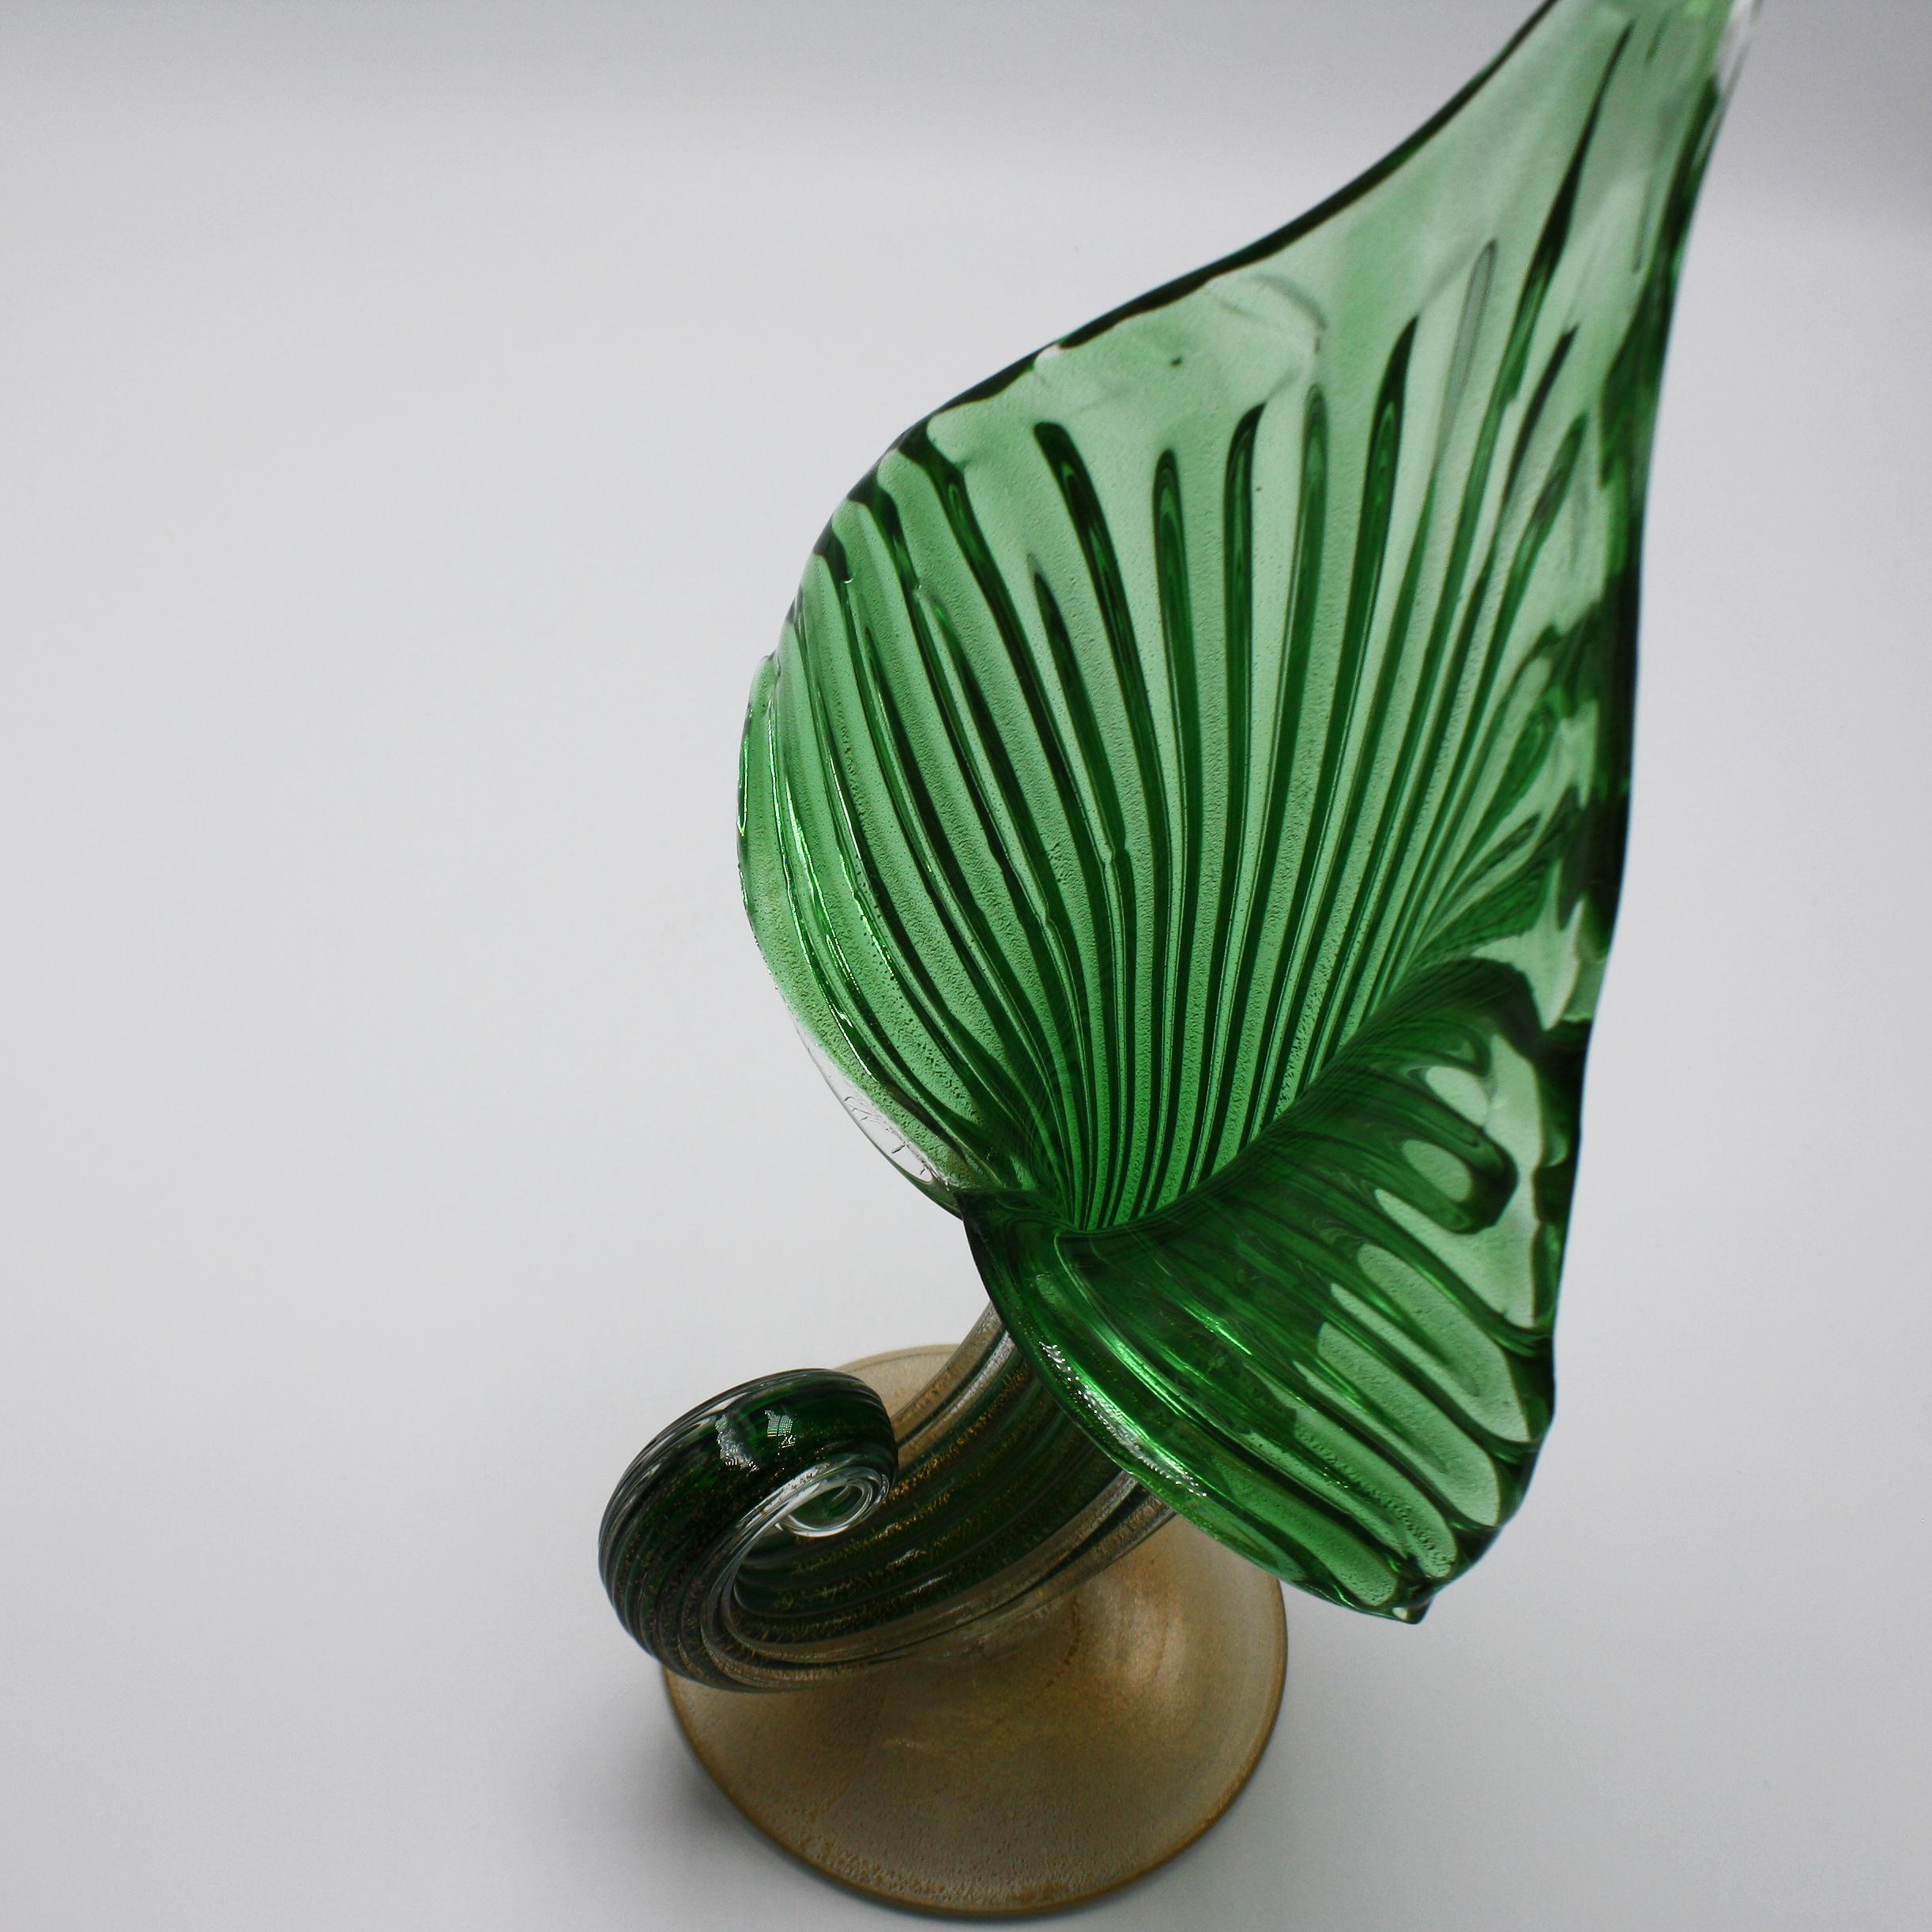 Mid-20th Century Archimede Seguso Jack-in-the-Pulpit Vase with 24-Karat Gold Inclusions